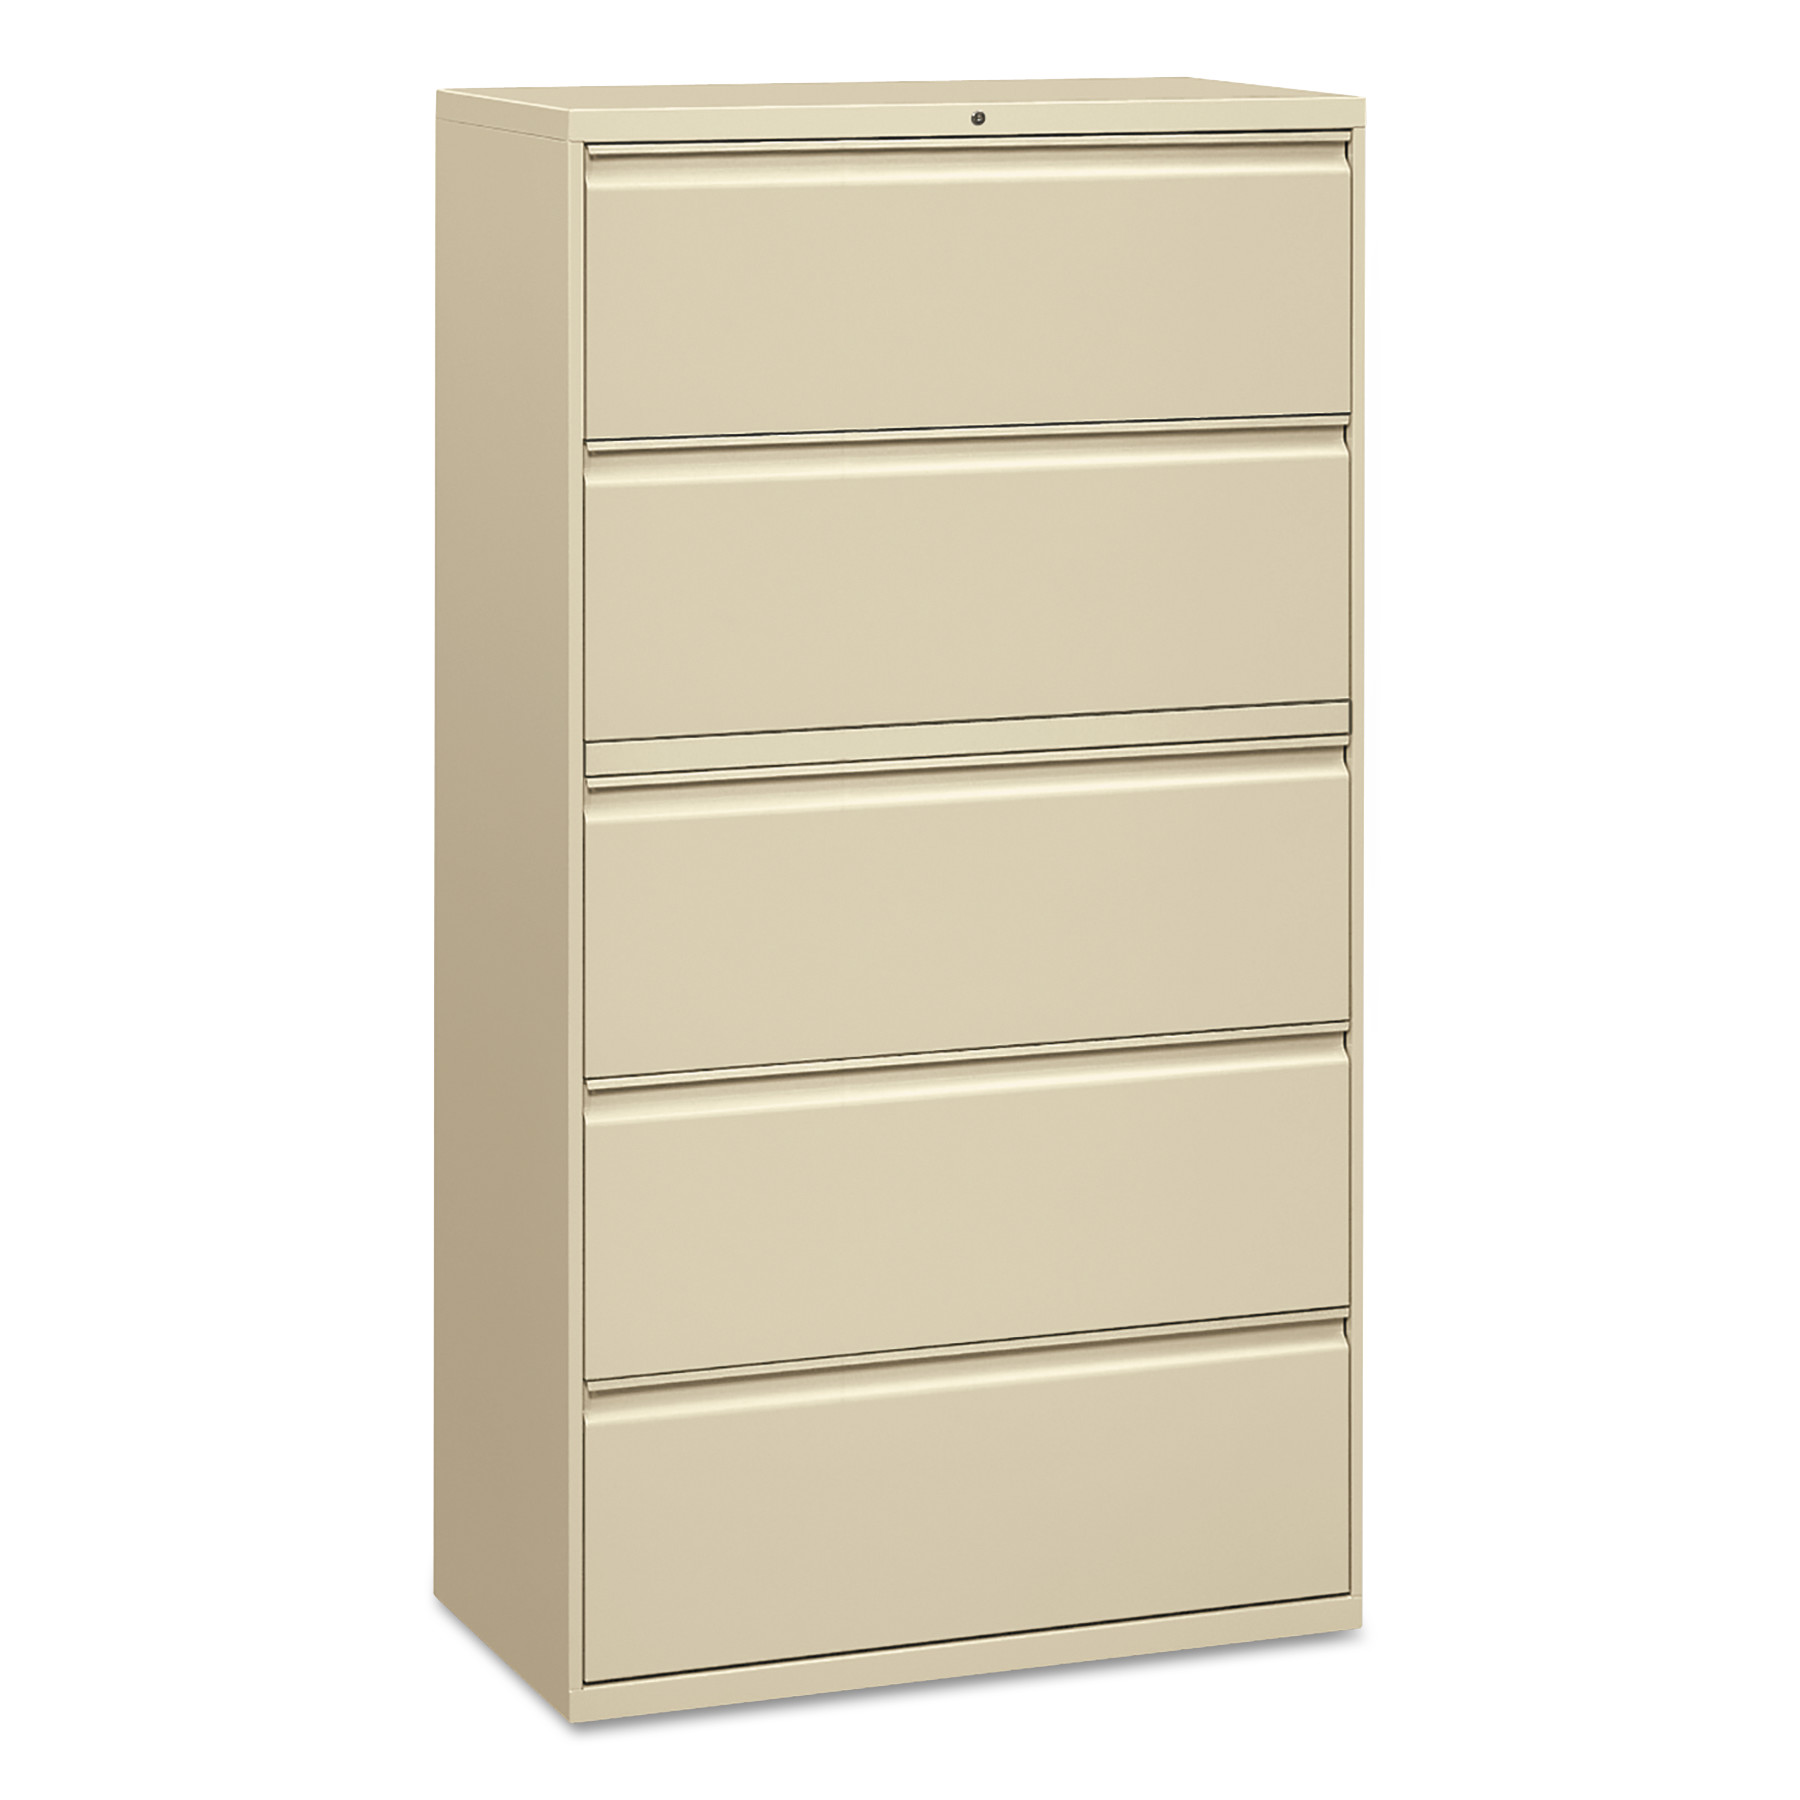 Five-Drawer Lateral File Cabinet 36W X 18D X 64.25H Putty | Total Quantity: 1 - image 1 of 2